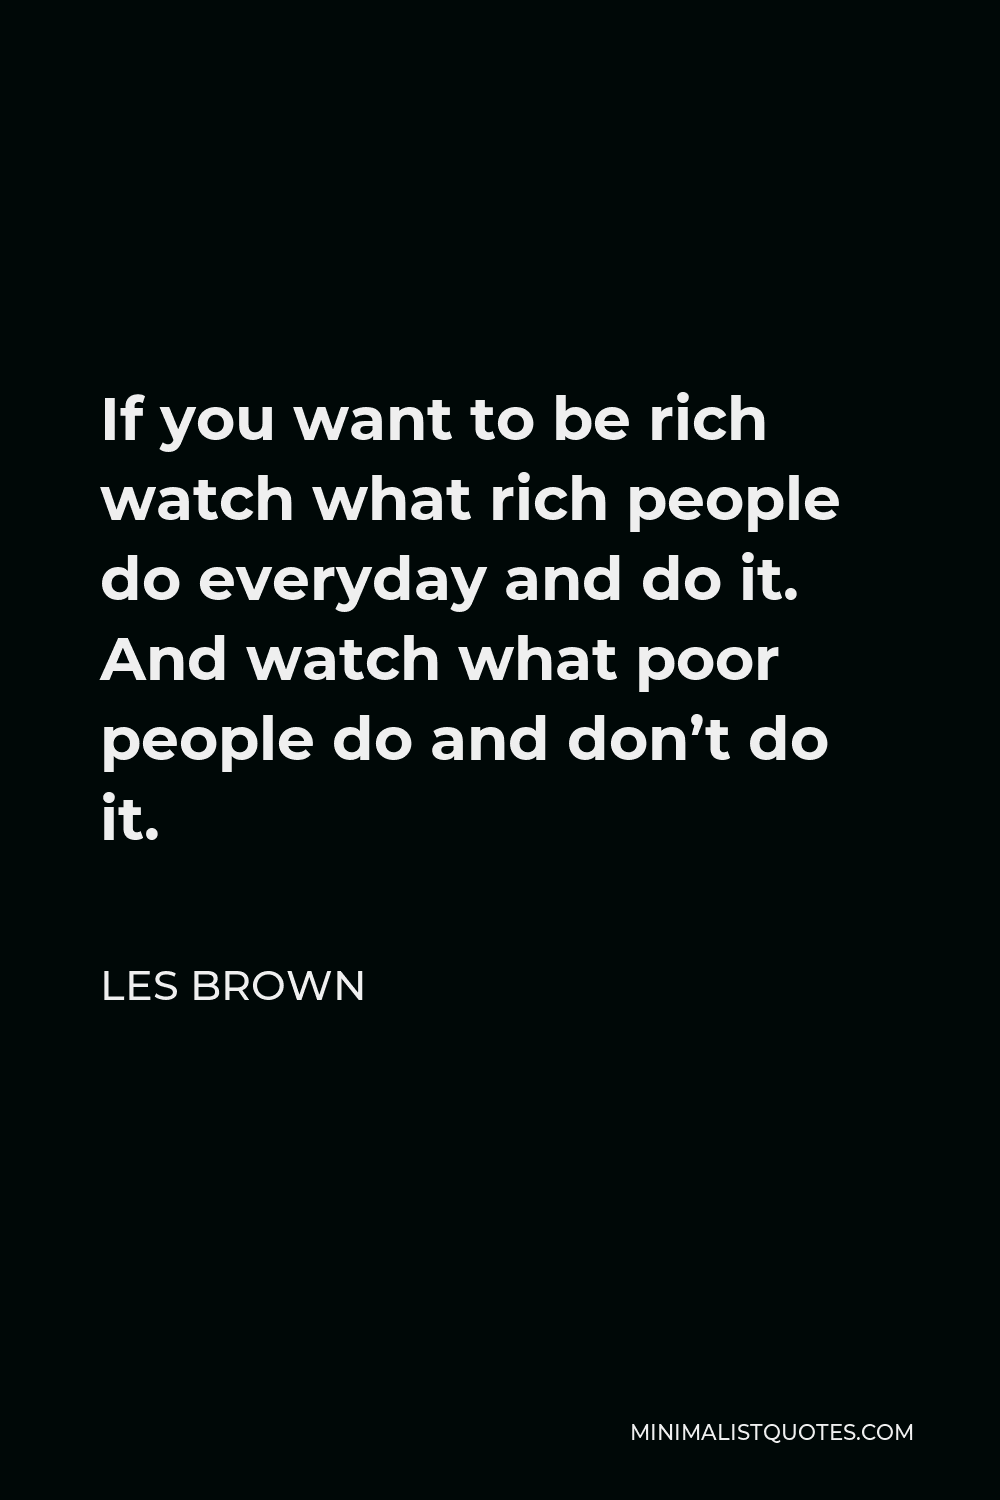 Les Brown Quote - If you want to be rich watch what rich people do everyday and do it. And watch what poor people do and don’t do it.